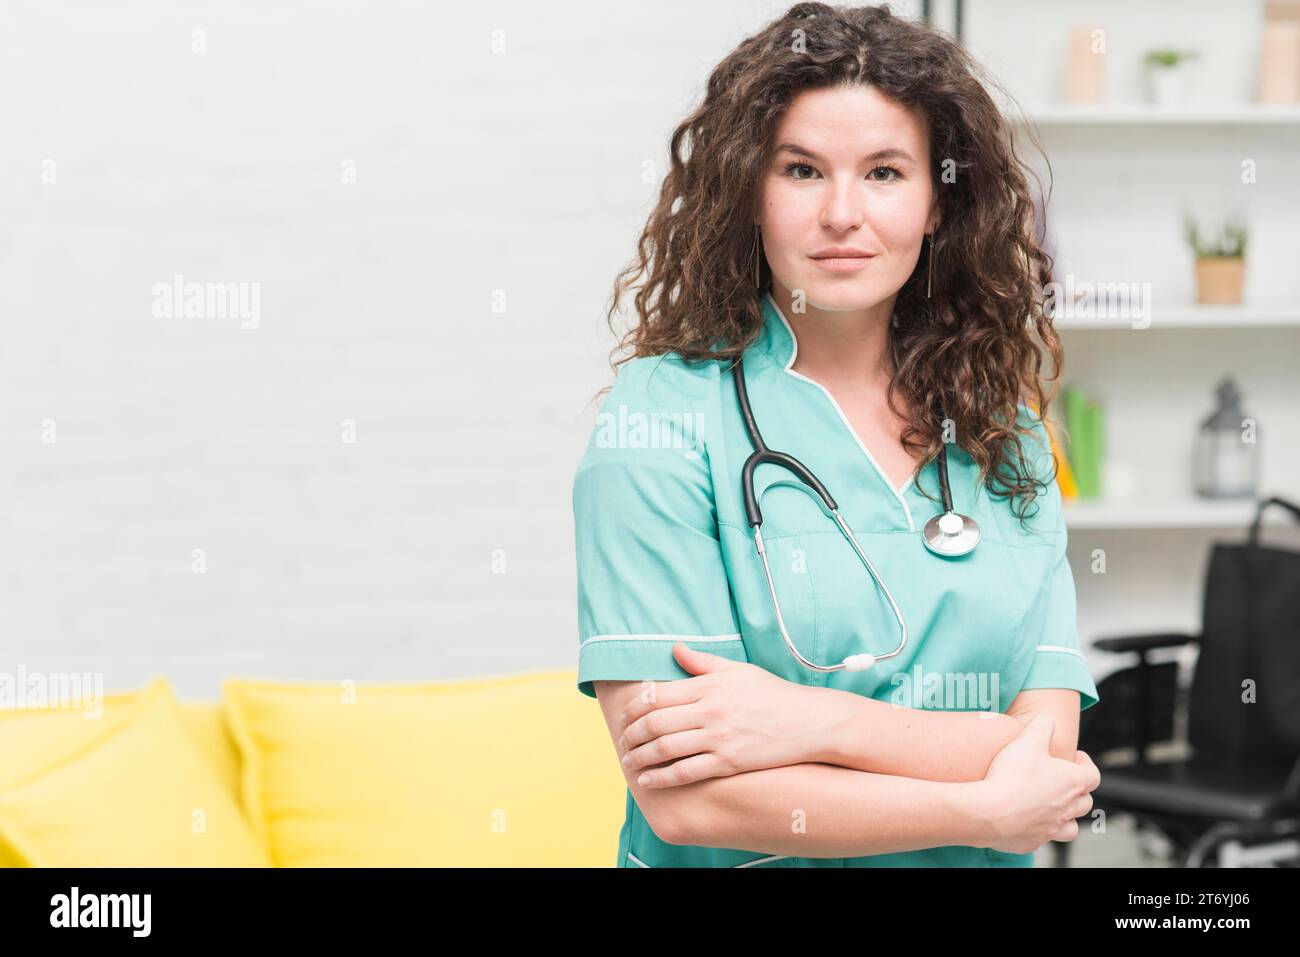 Young woman with stethoscope around her neck standing hospital Stock Photo